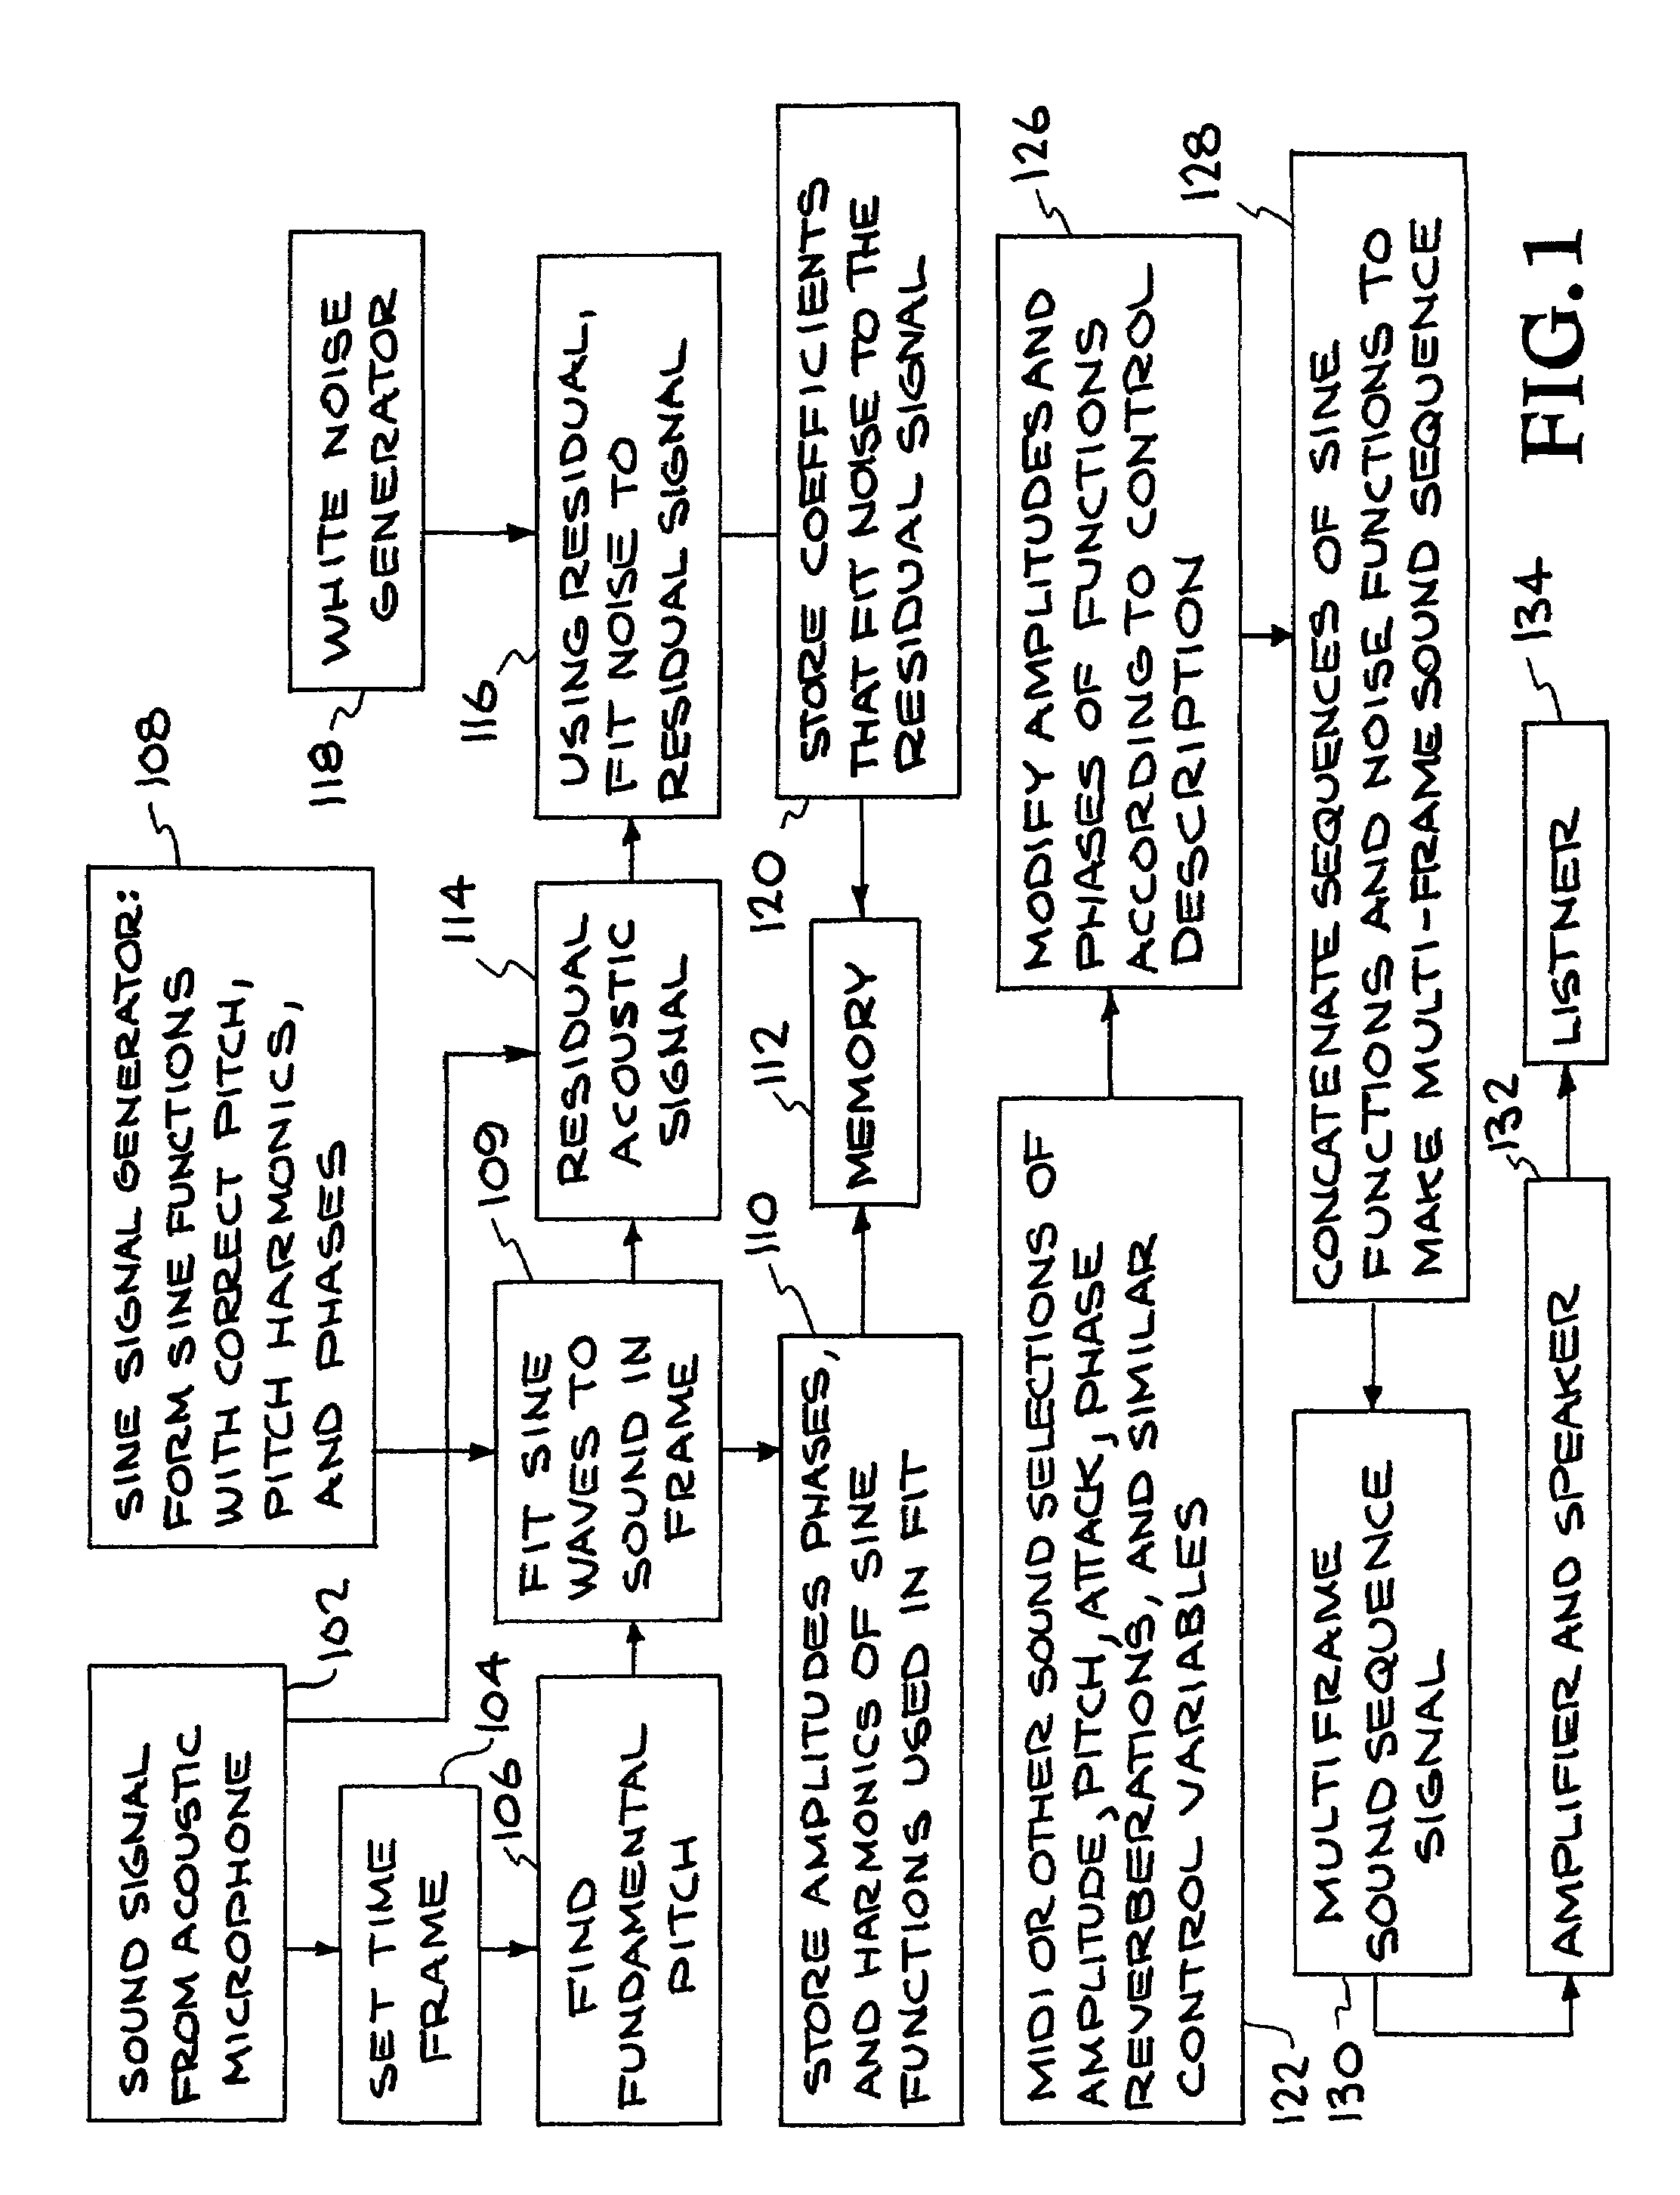 System and method for characterizing, synthesizing, and/or canceling out acoustic signals from inanimate sound sources